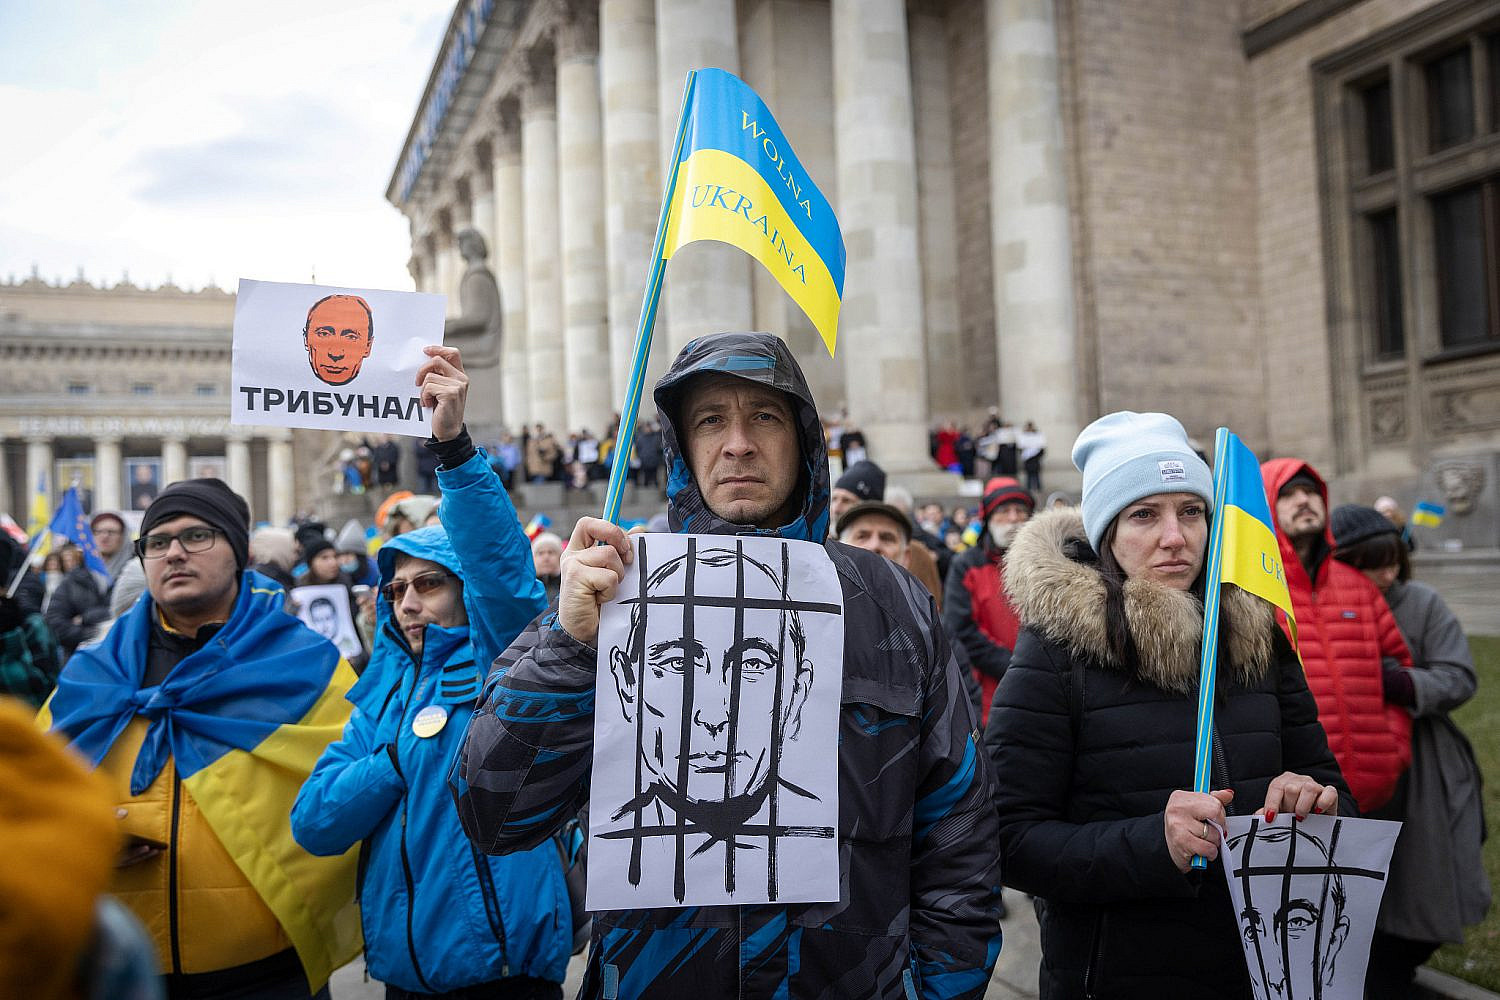 Demonstrators and Ukrainian refugees carry placards and flags during a protest against the Russian invasion of Ukraine, outside the Palace of Culture and Science in Warsaw, Poland, March 6, 2022. (Olivier Fitoussi/Flash90)